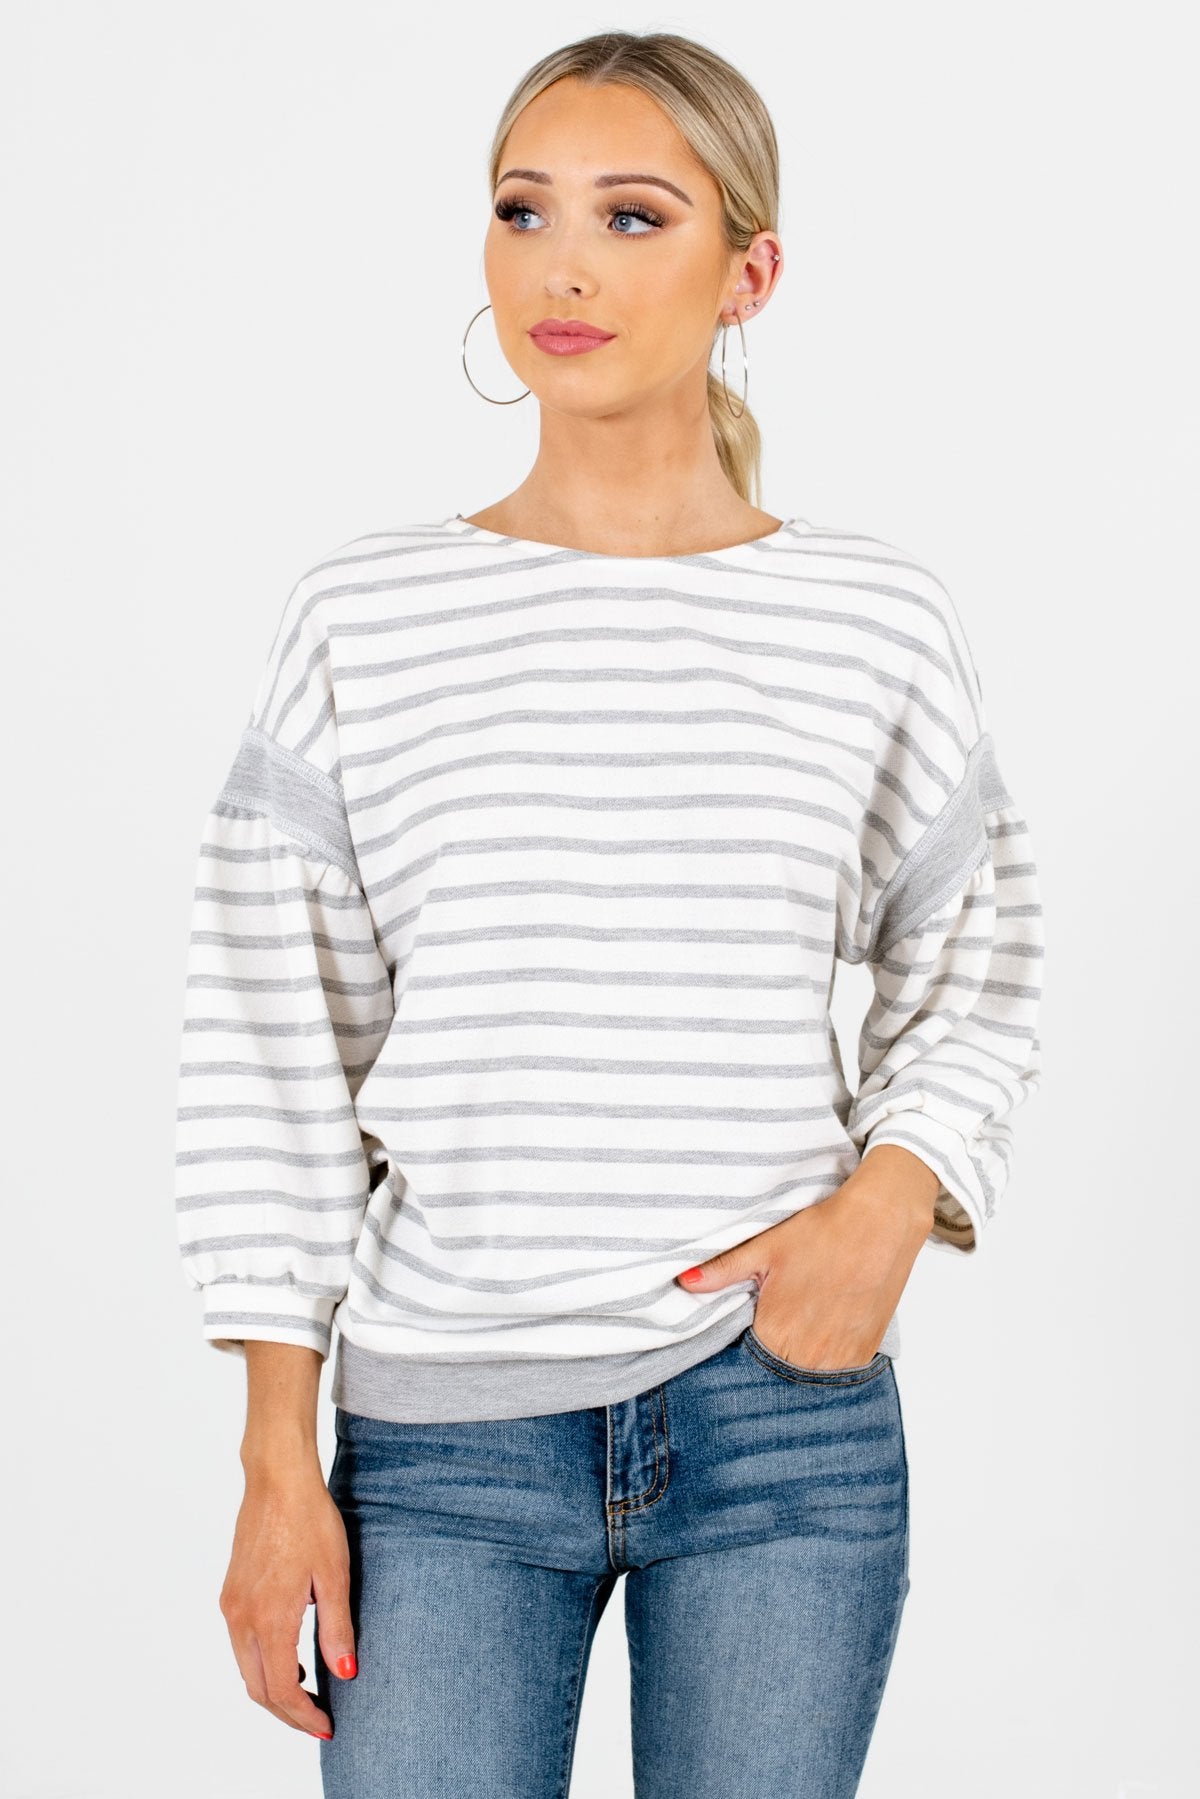 White and Gray Striped Pattern Boutique Tops for Women